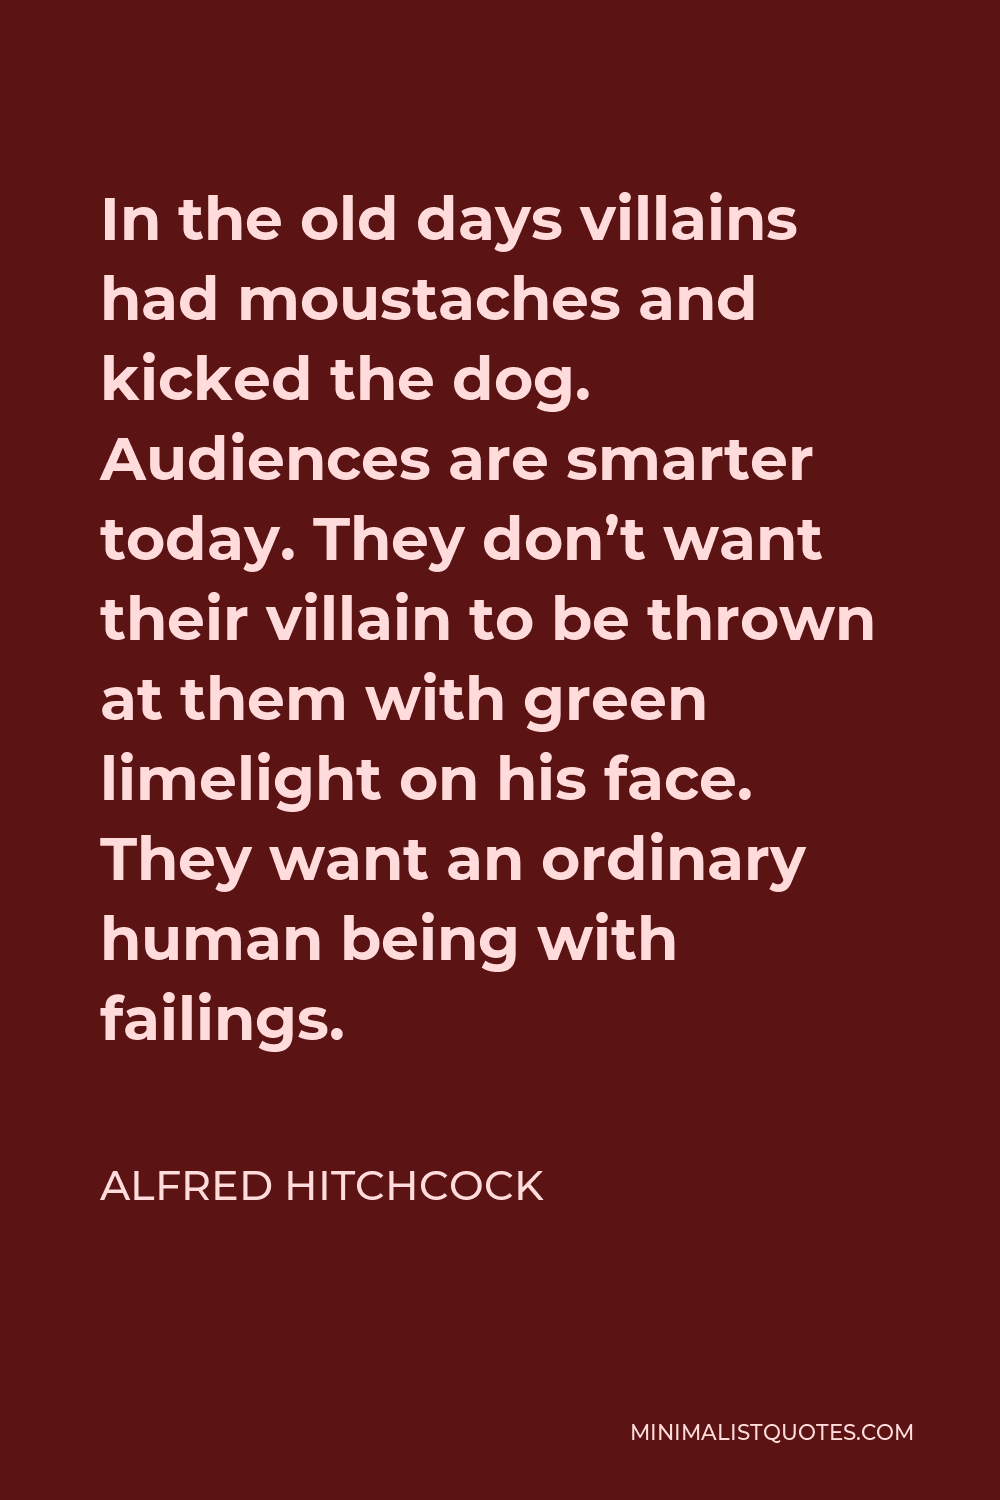 Alfred Hitchcock Quote - In the old days villains had moustaches and kicked the dog. Audiences are smarter today. They don’t want their villain to be thrown at them with green limelight on his face. They want an ordinary human being with failings.